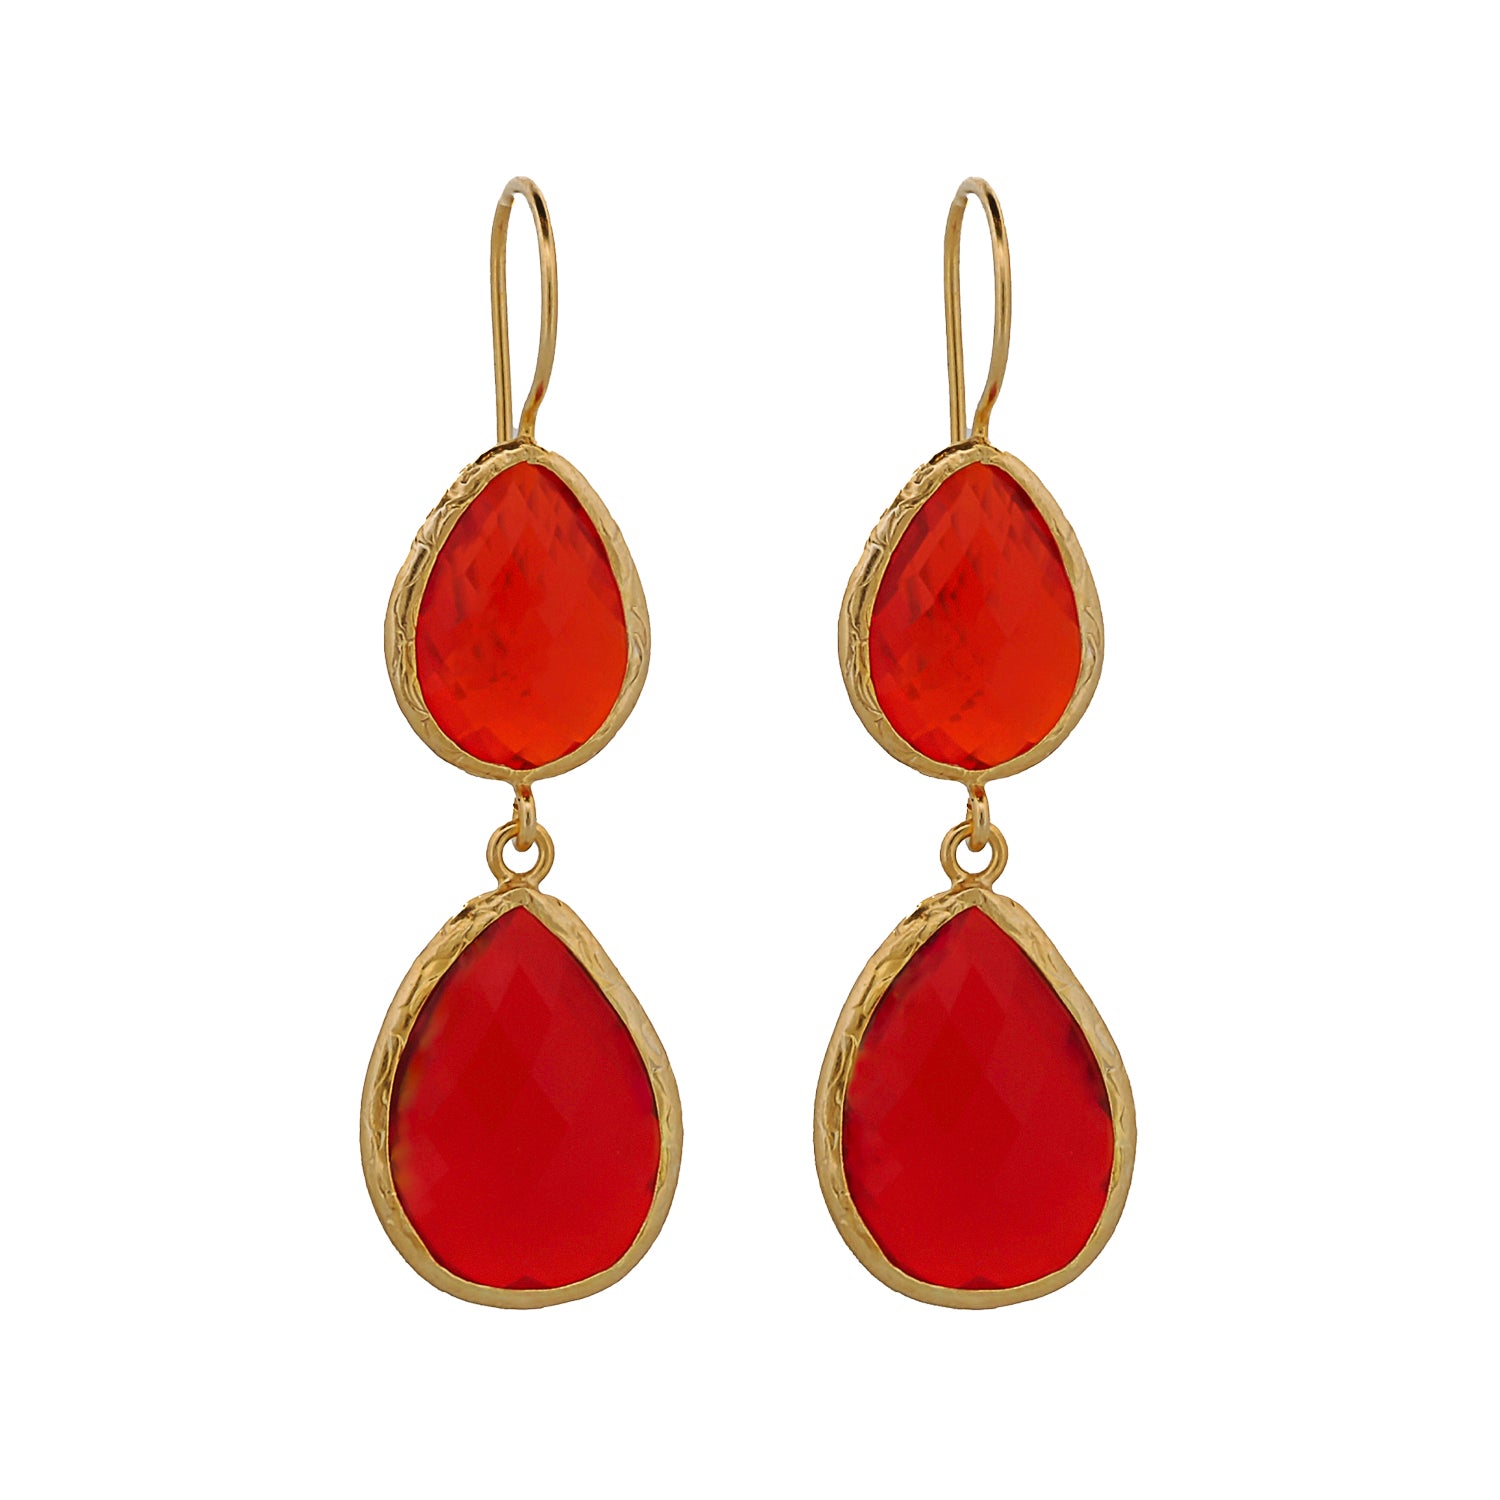 Radiant Elegance: Gold-Plated Double Red Stone Earrings for New Year Celebrations